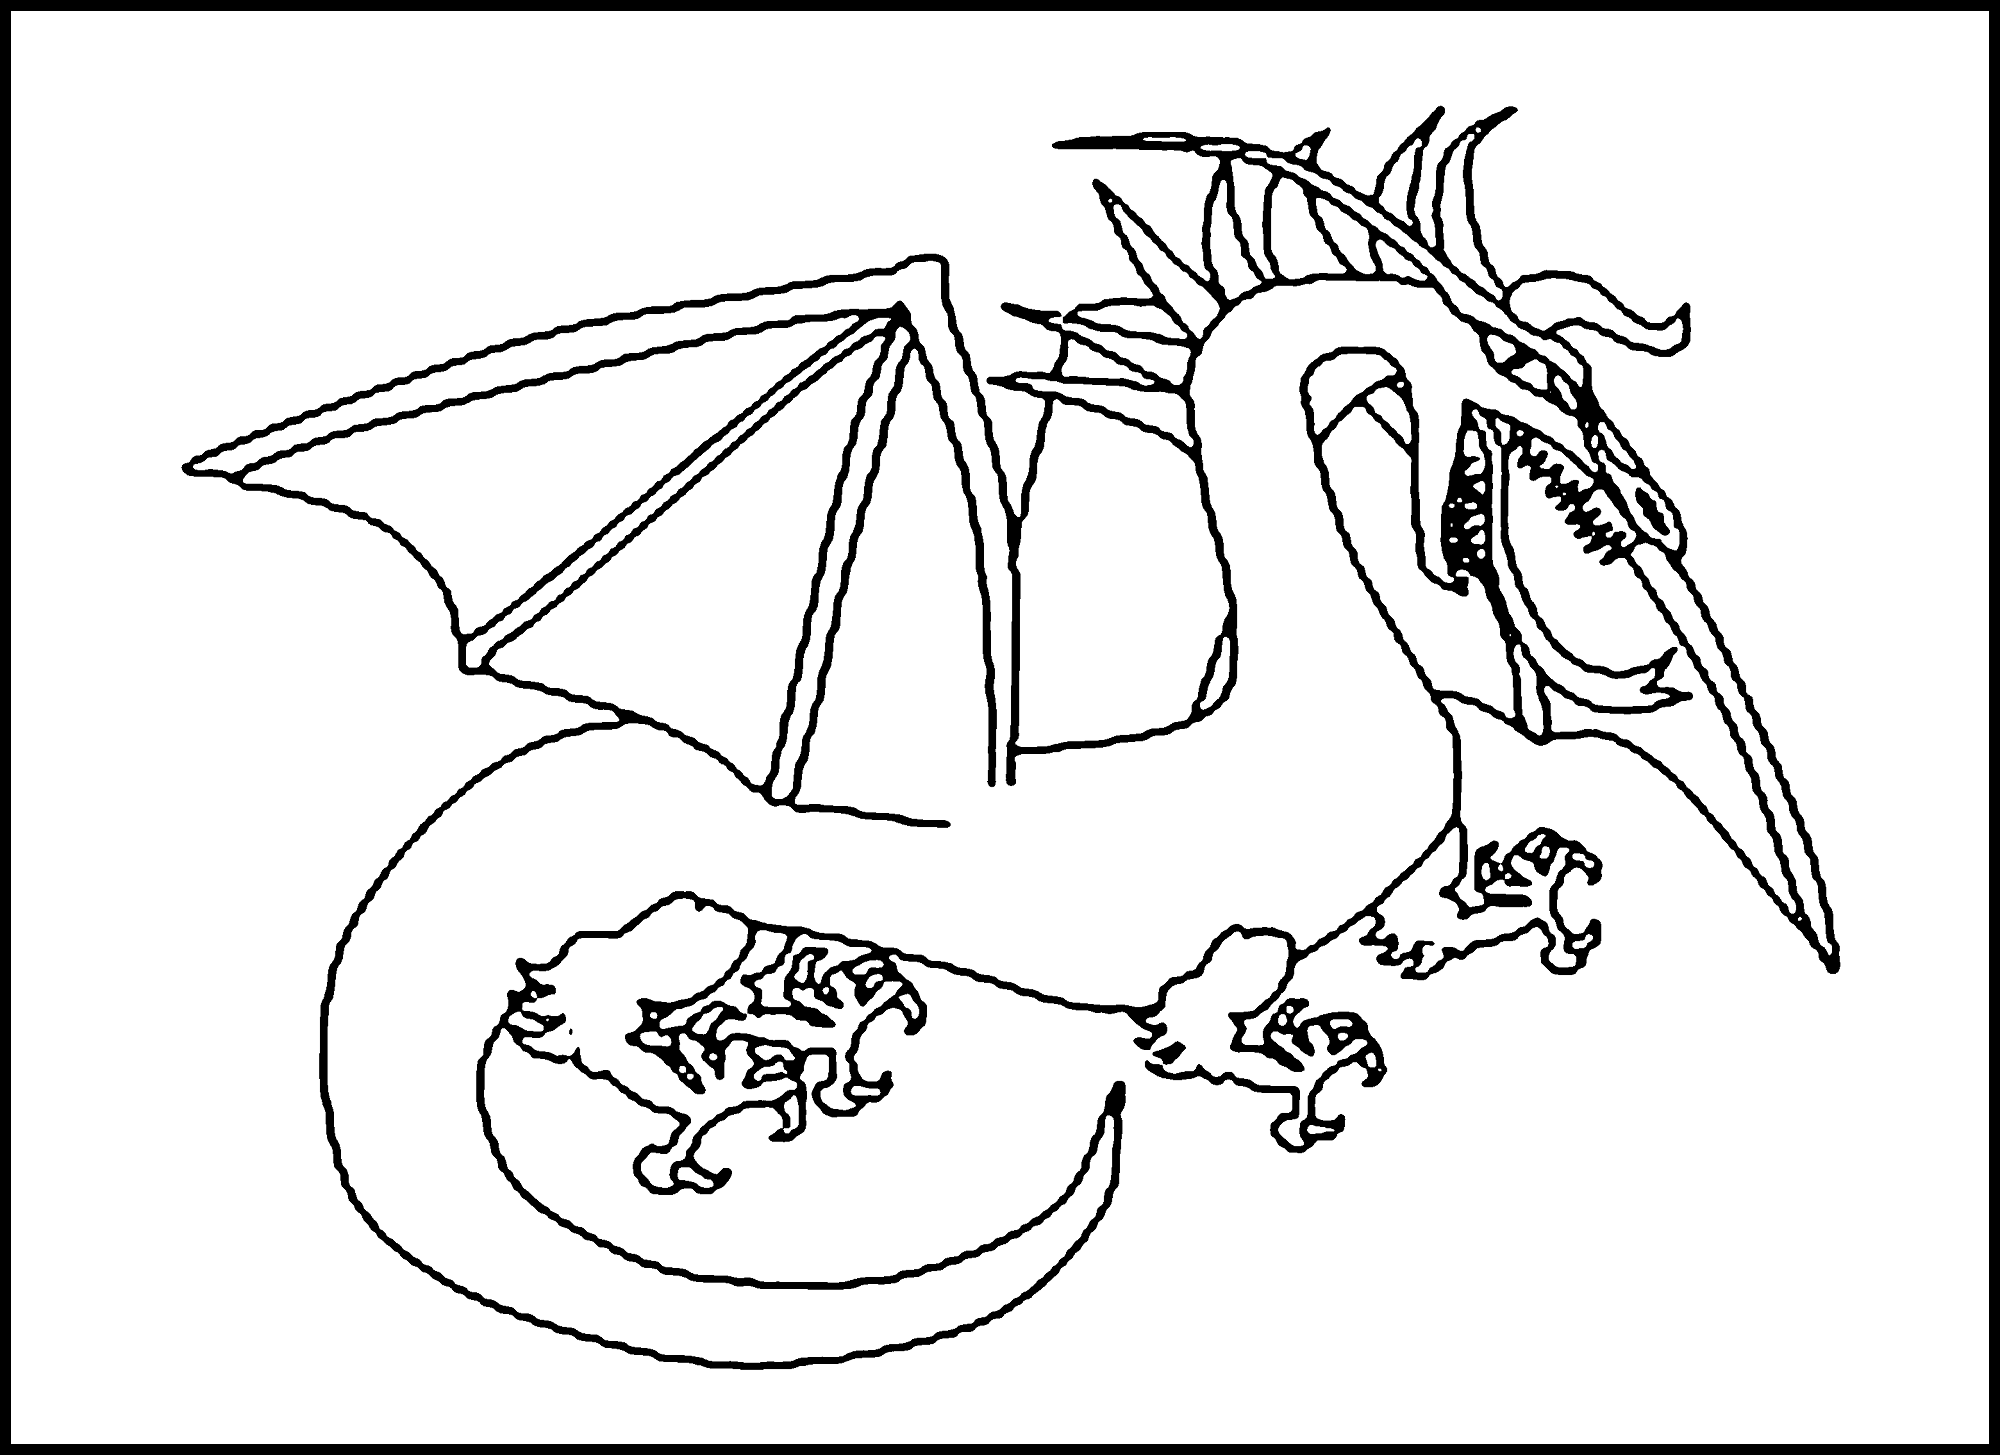 dragons to color dragon coloring pages printable only coloring pages to color dragons 